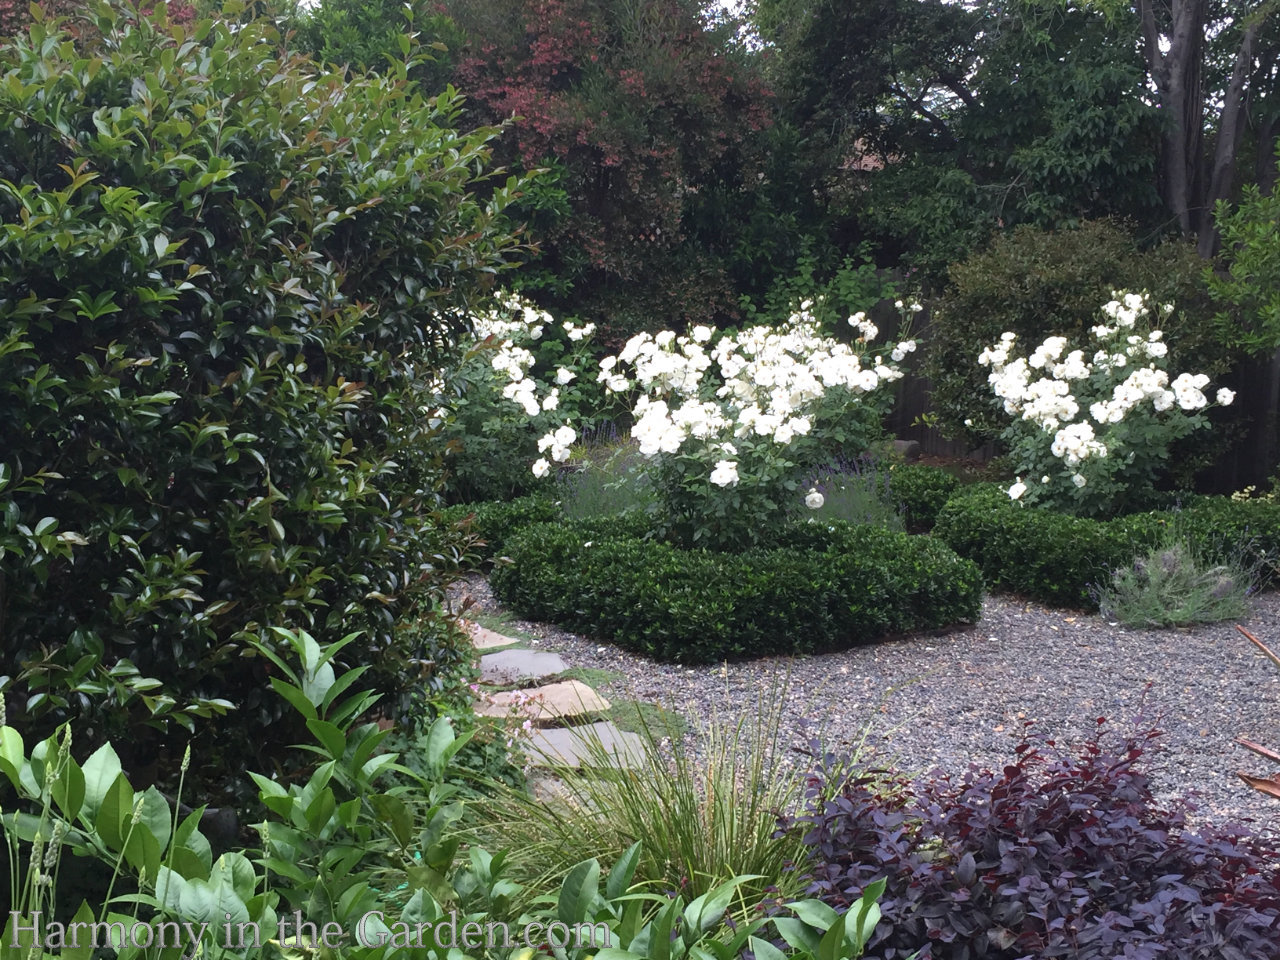 How to use white in the garden